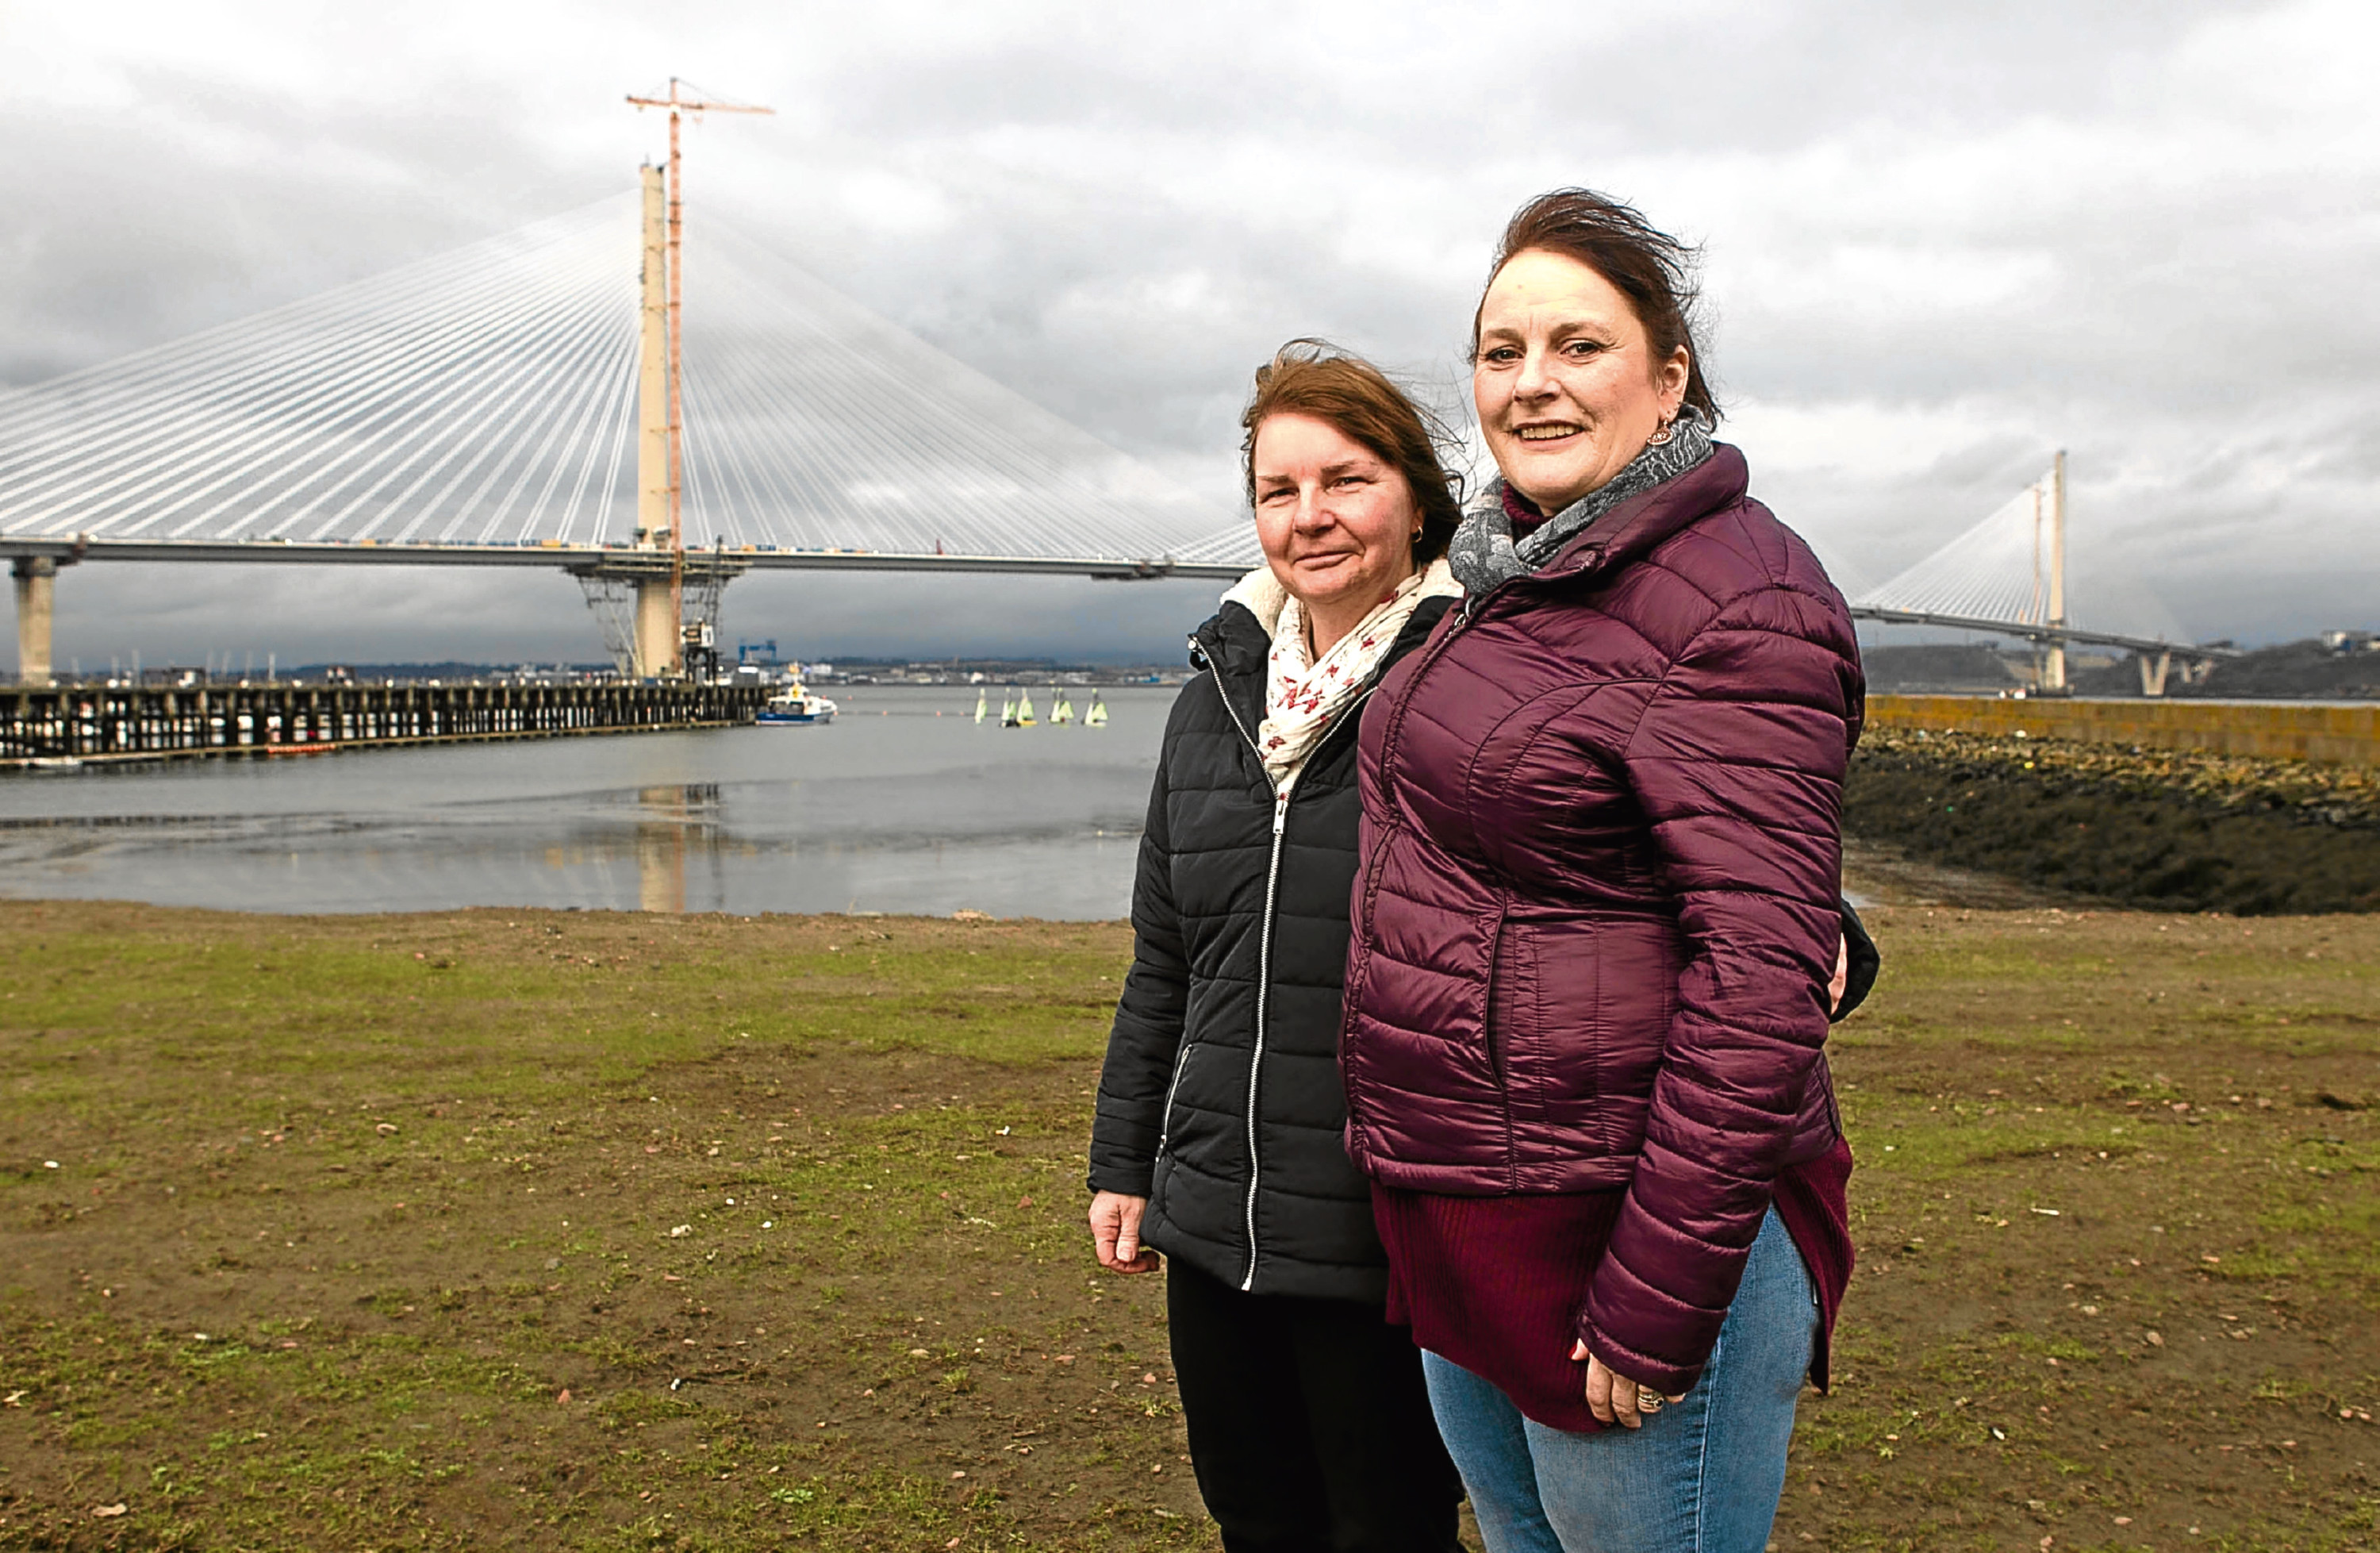 Cousins Jenny (purple jacket) and Heather are looking to recreate what their grandfather did and be the first people to walk across the new Queensferry Crossing